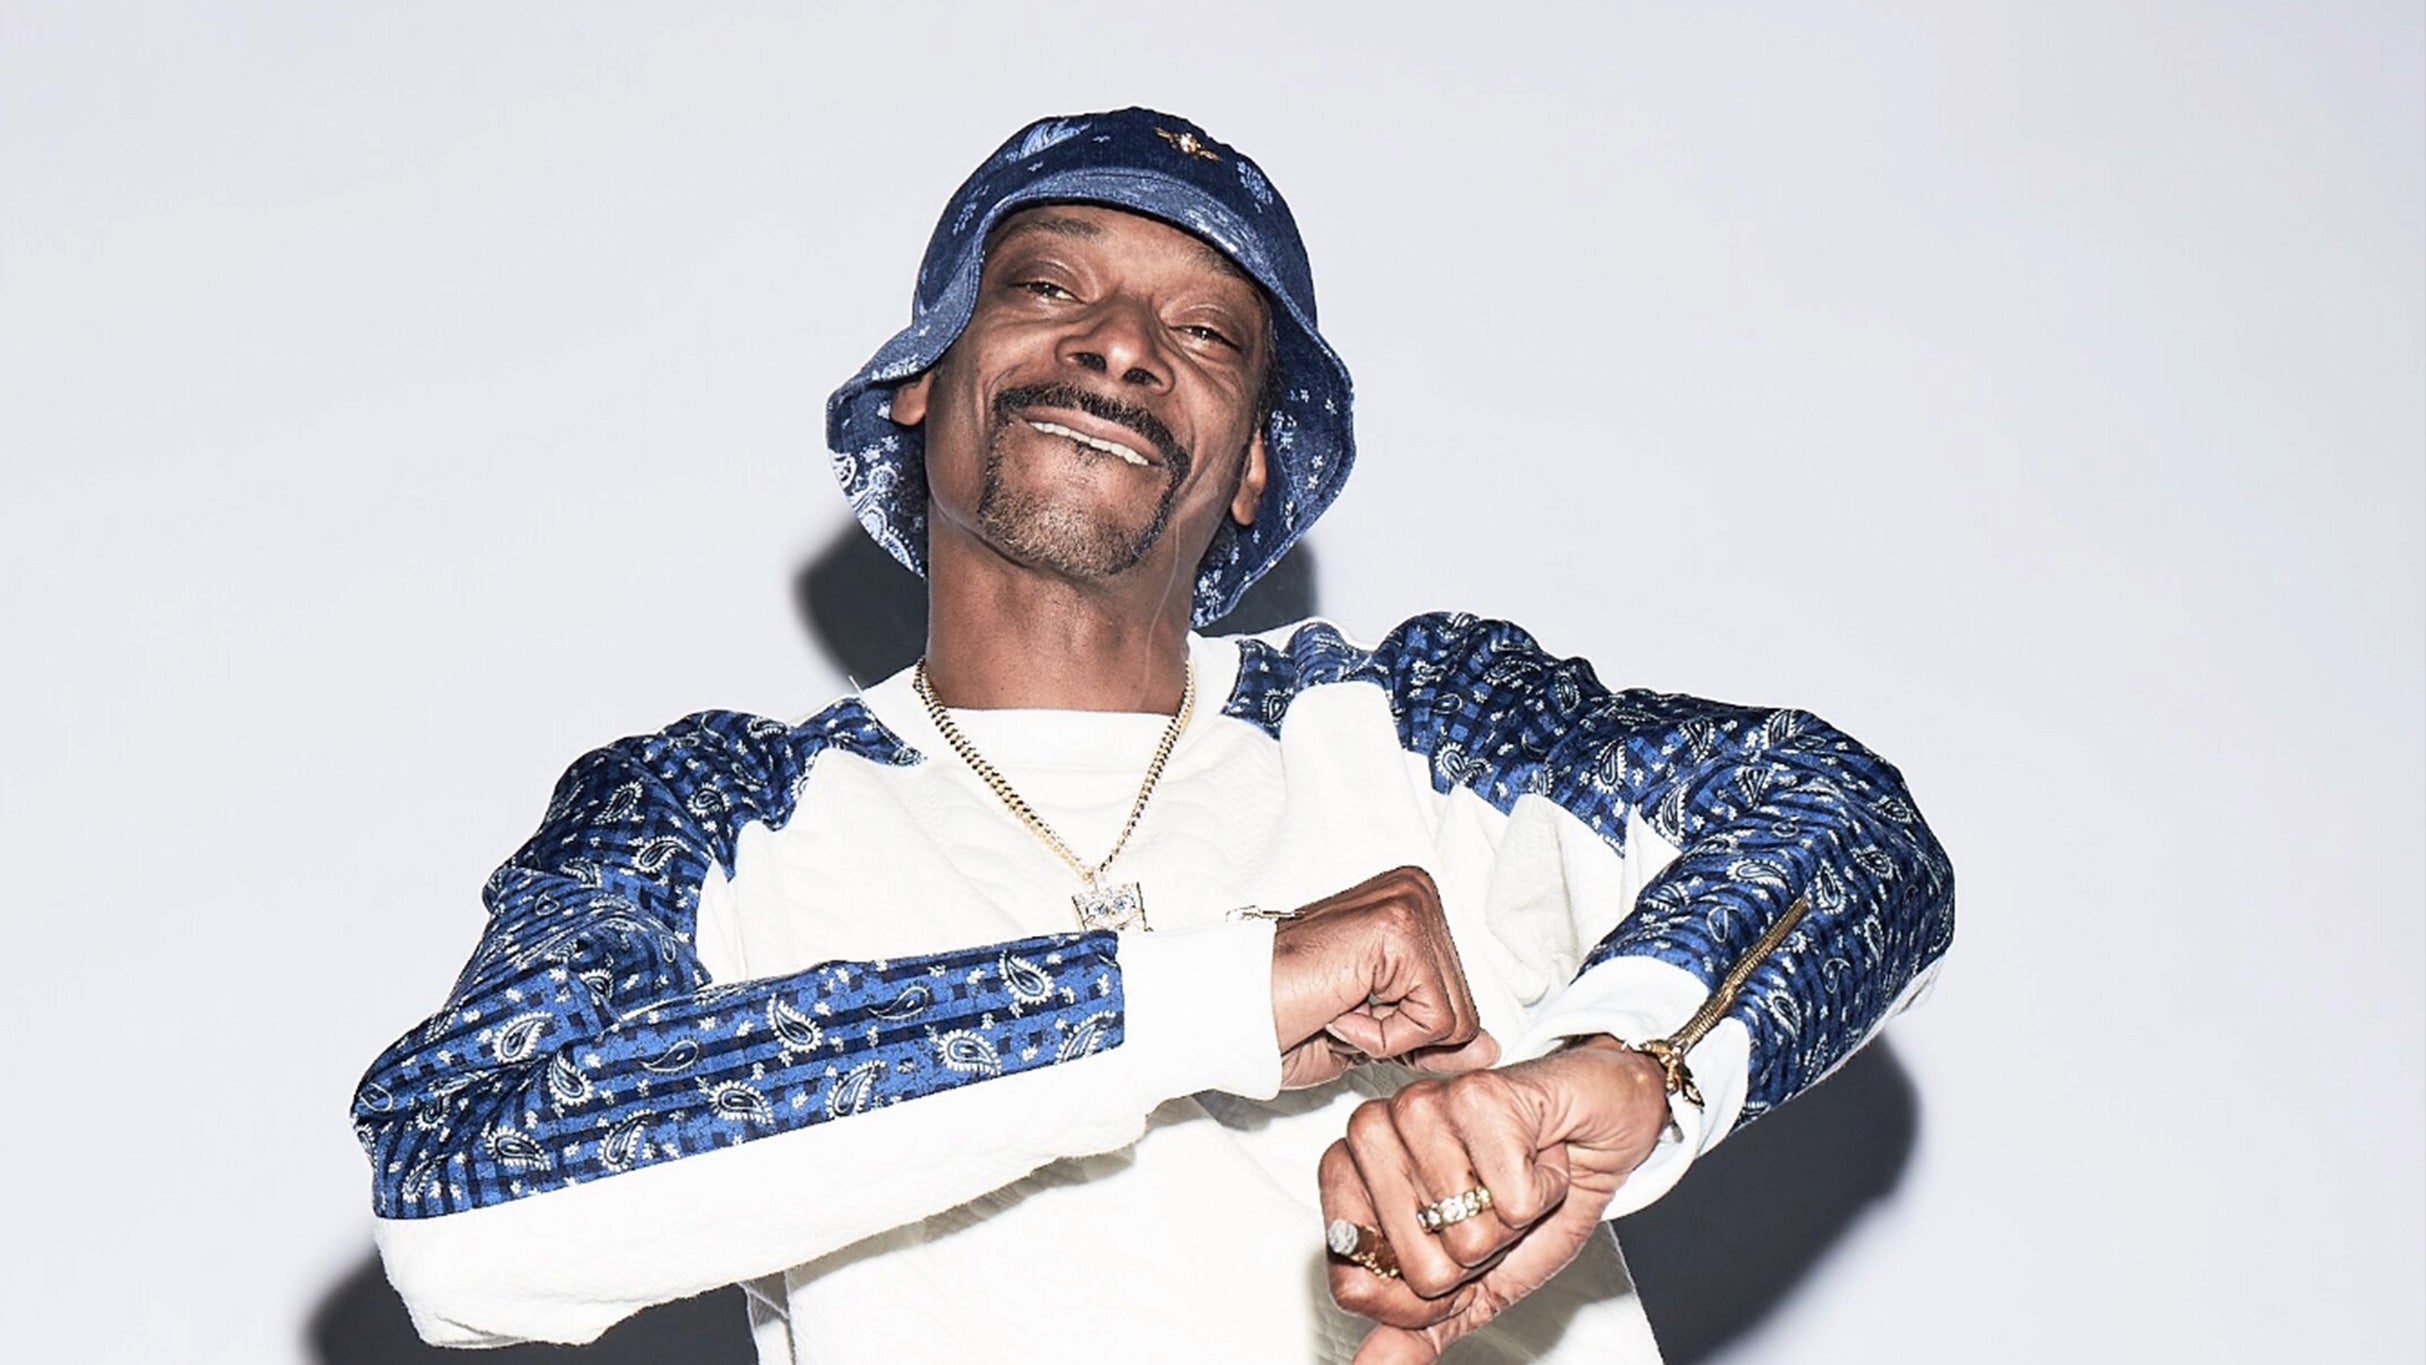 Snoop Dogg - Cali To Canada Tour  presales in Montreal